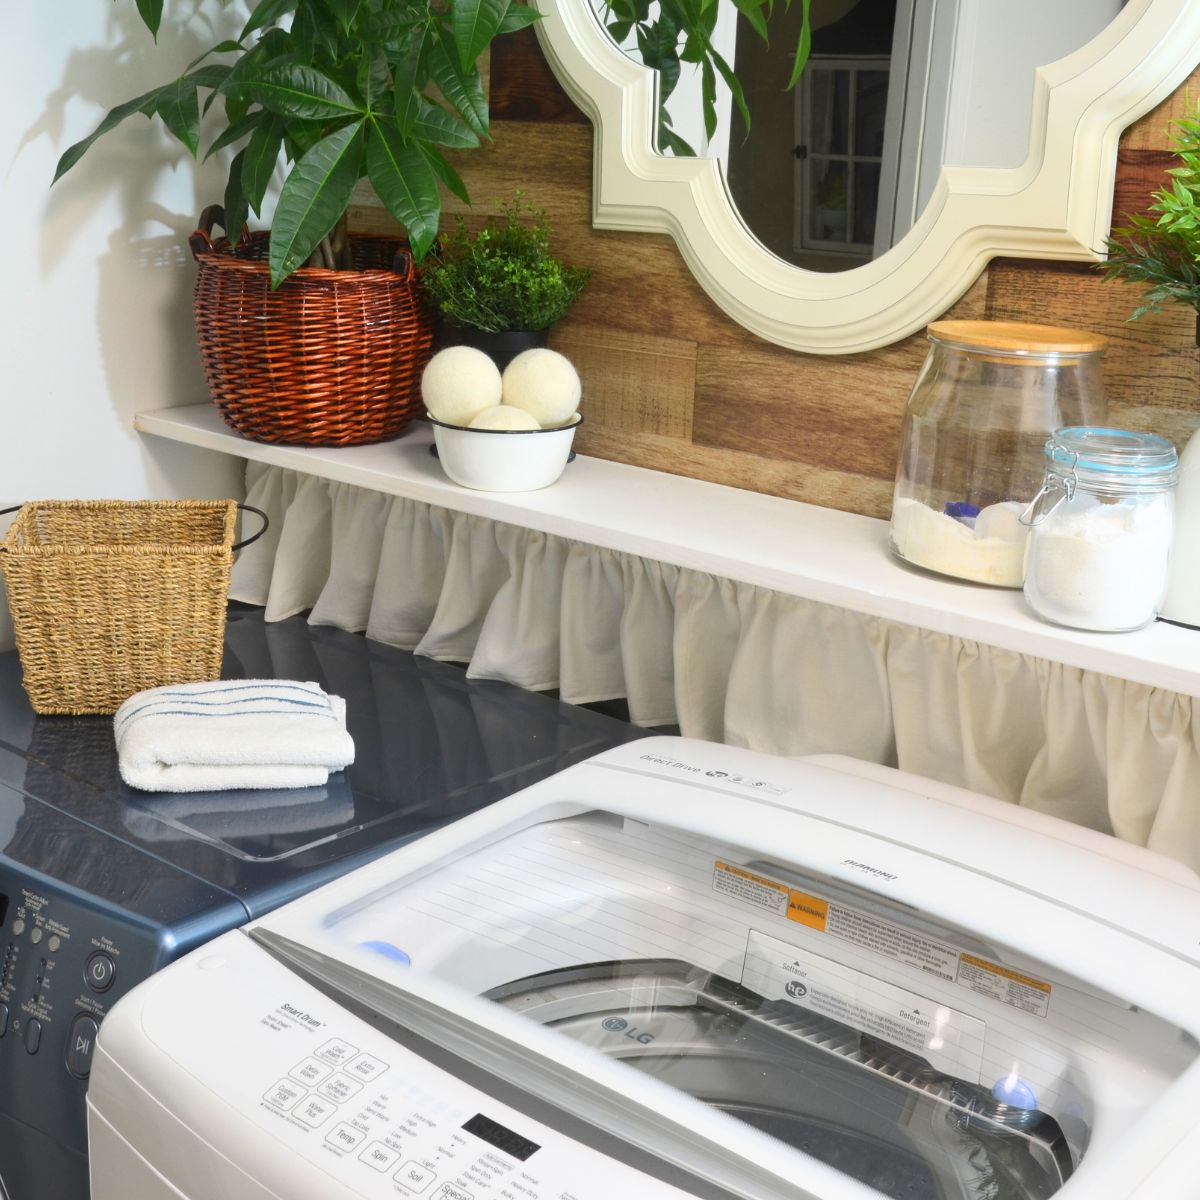 The Real Homemakers’ Guide to Laundry Stain Removal